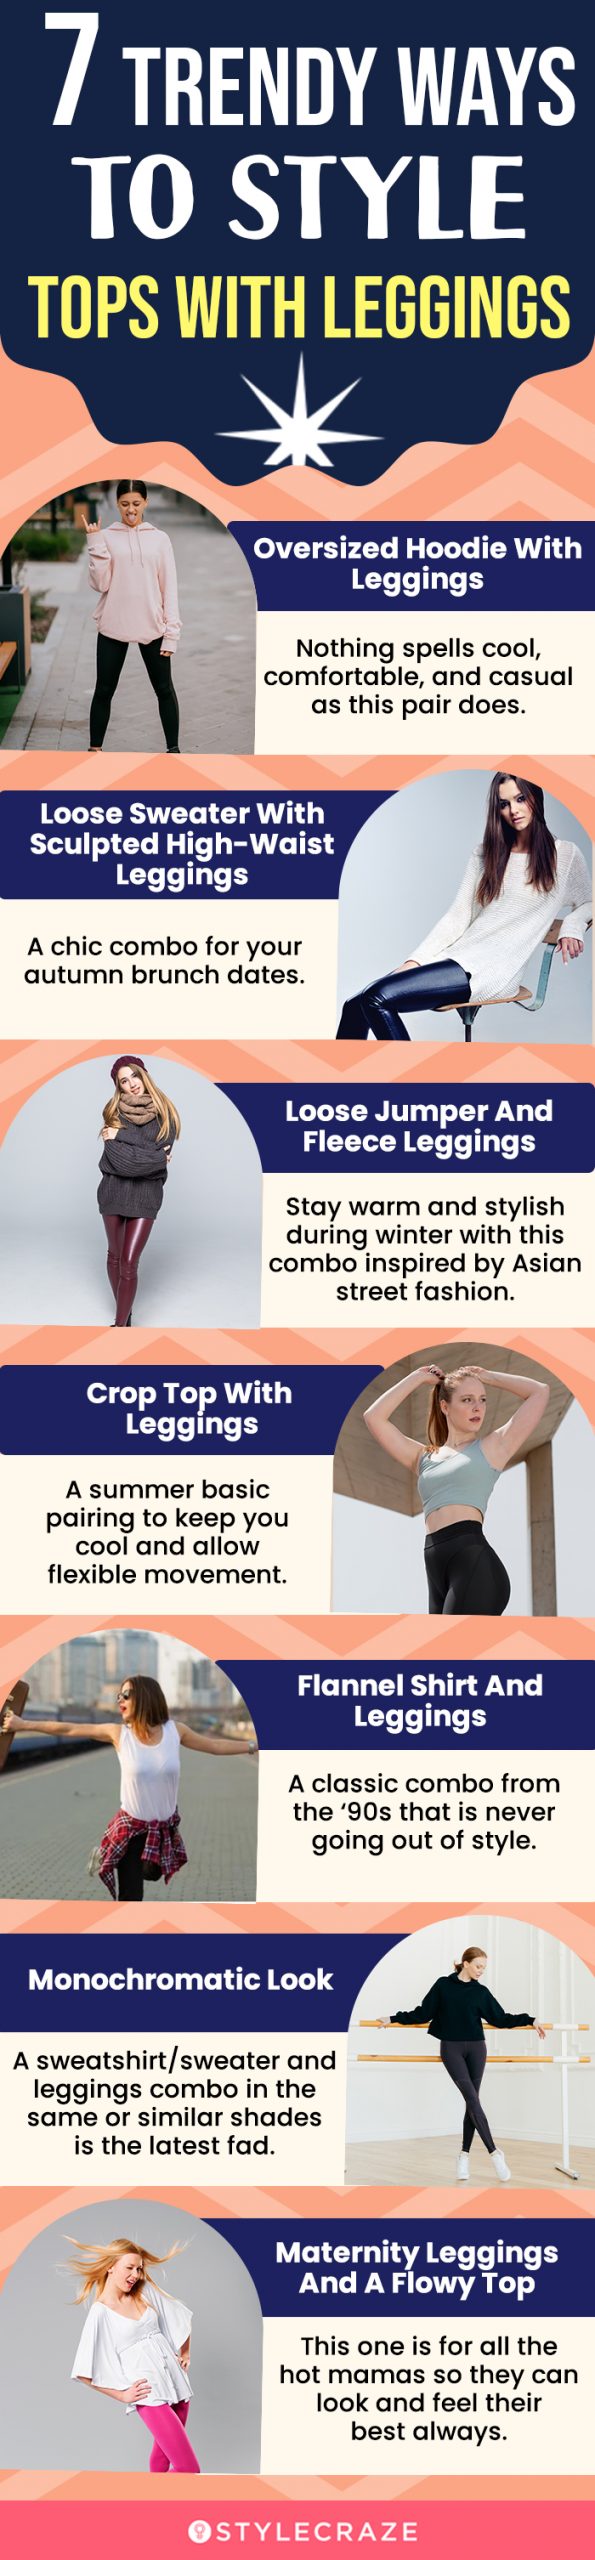 7 trendy ways to style tops with leggings (infographic)